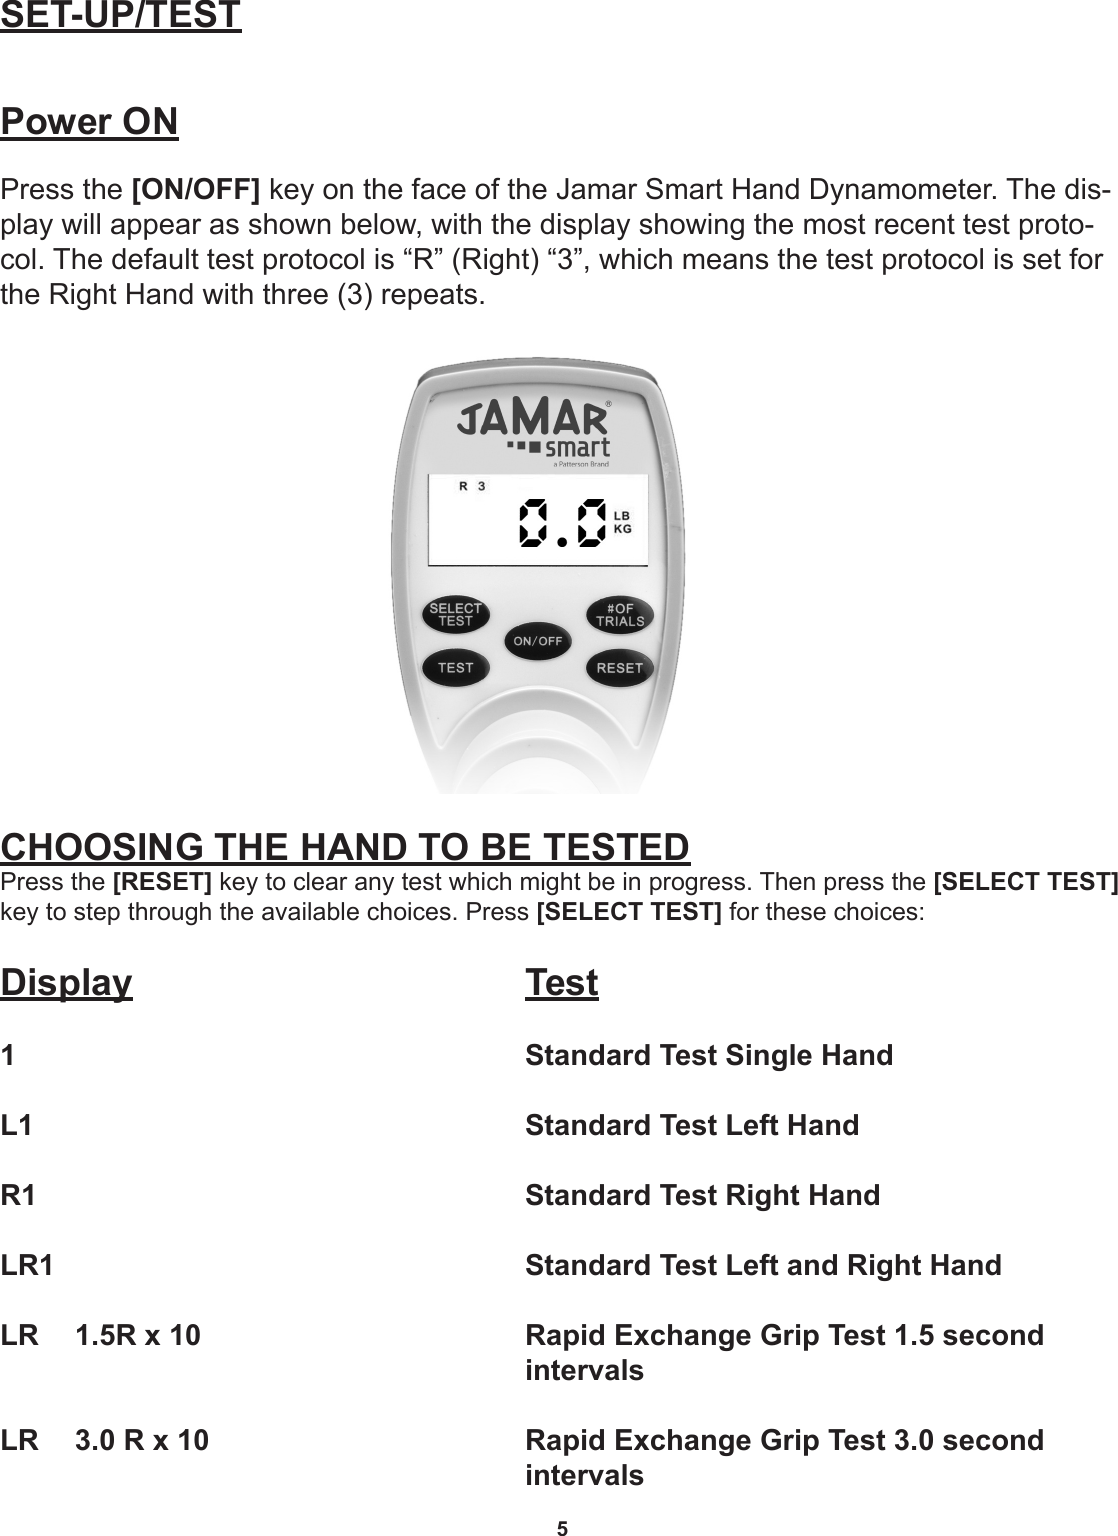 5SET-UP/TESTPower ONPress the [ON/OFF] key on the face of the Jamar Smart Hand Dynamometer. The dis-play will appear as shown below, with the display showing the most recent test proto-col. The default test protocol is “R” (Right) “3”, which means the test protocol is set for the Right Hand with three (3) repeats.CHOOSING THE HAND TO BE TESTEDPress the [RESET] key to clear any test which might be in progress. Then press the [SELECT TEST] key to step through the available choices. Press [SELECT TEST] for these choices:Display       Test1       Standard Test Single HandL1       Standard Test Left HandR1       Standard Test Right HandLR1       Standard Test Left and Right Hand LR  1.5R x 10          Rapid Exchange Grip Test 1.5 second           intervalsLR  3.0 R x 10          Rapid Exchange Grip Test 3.0 second           intervals